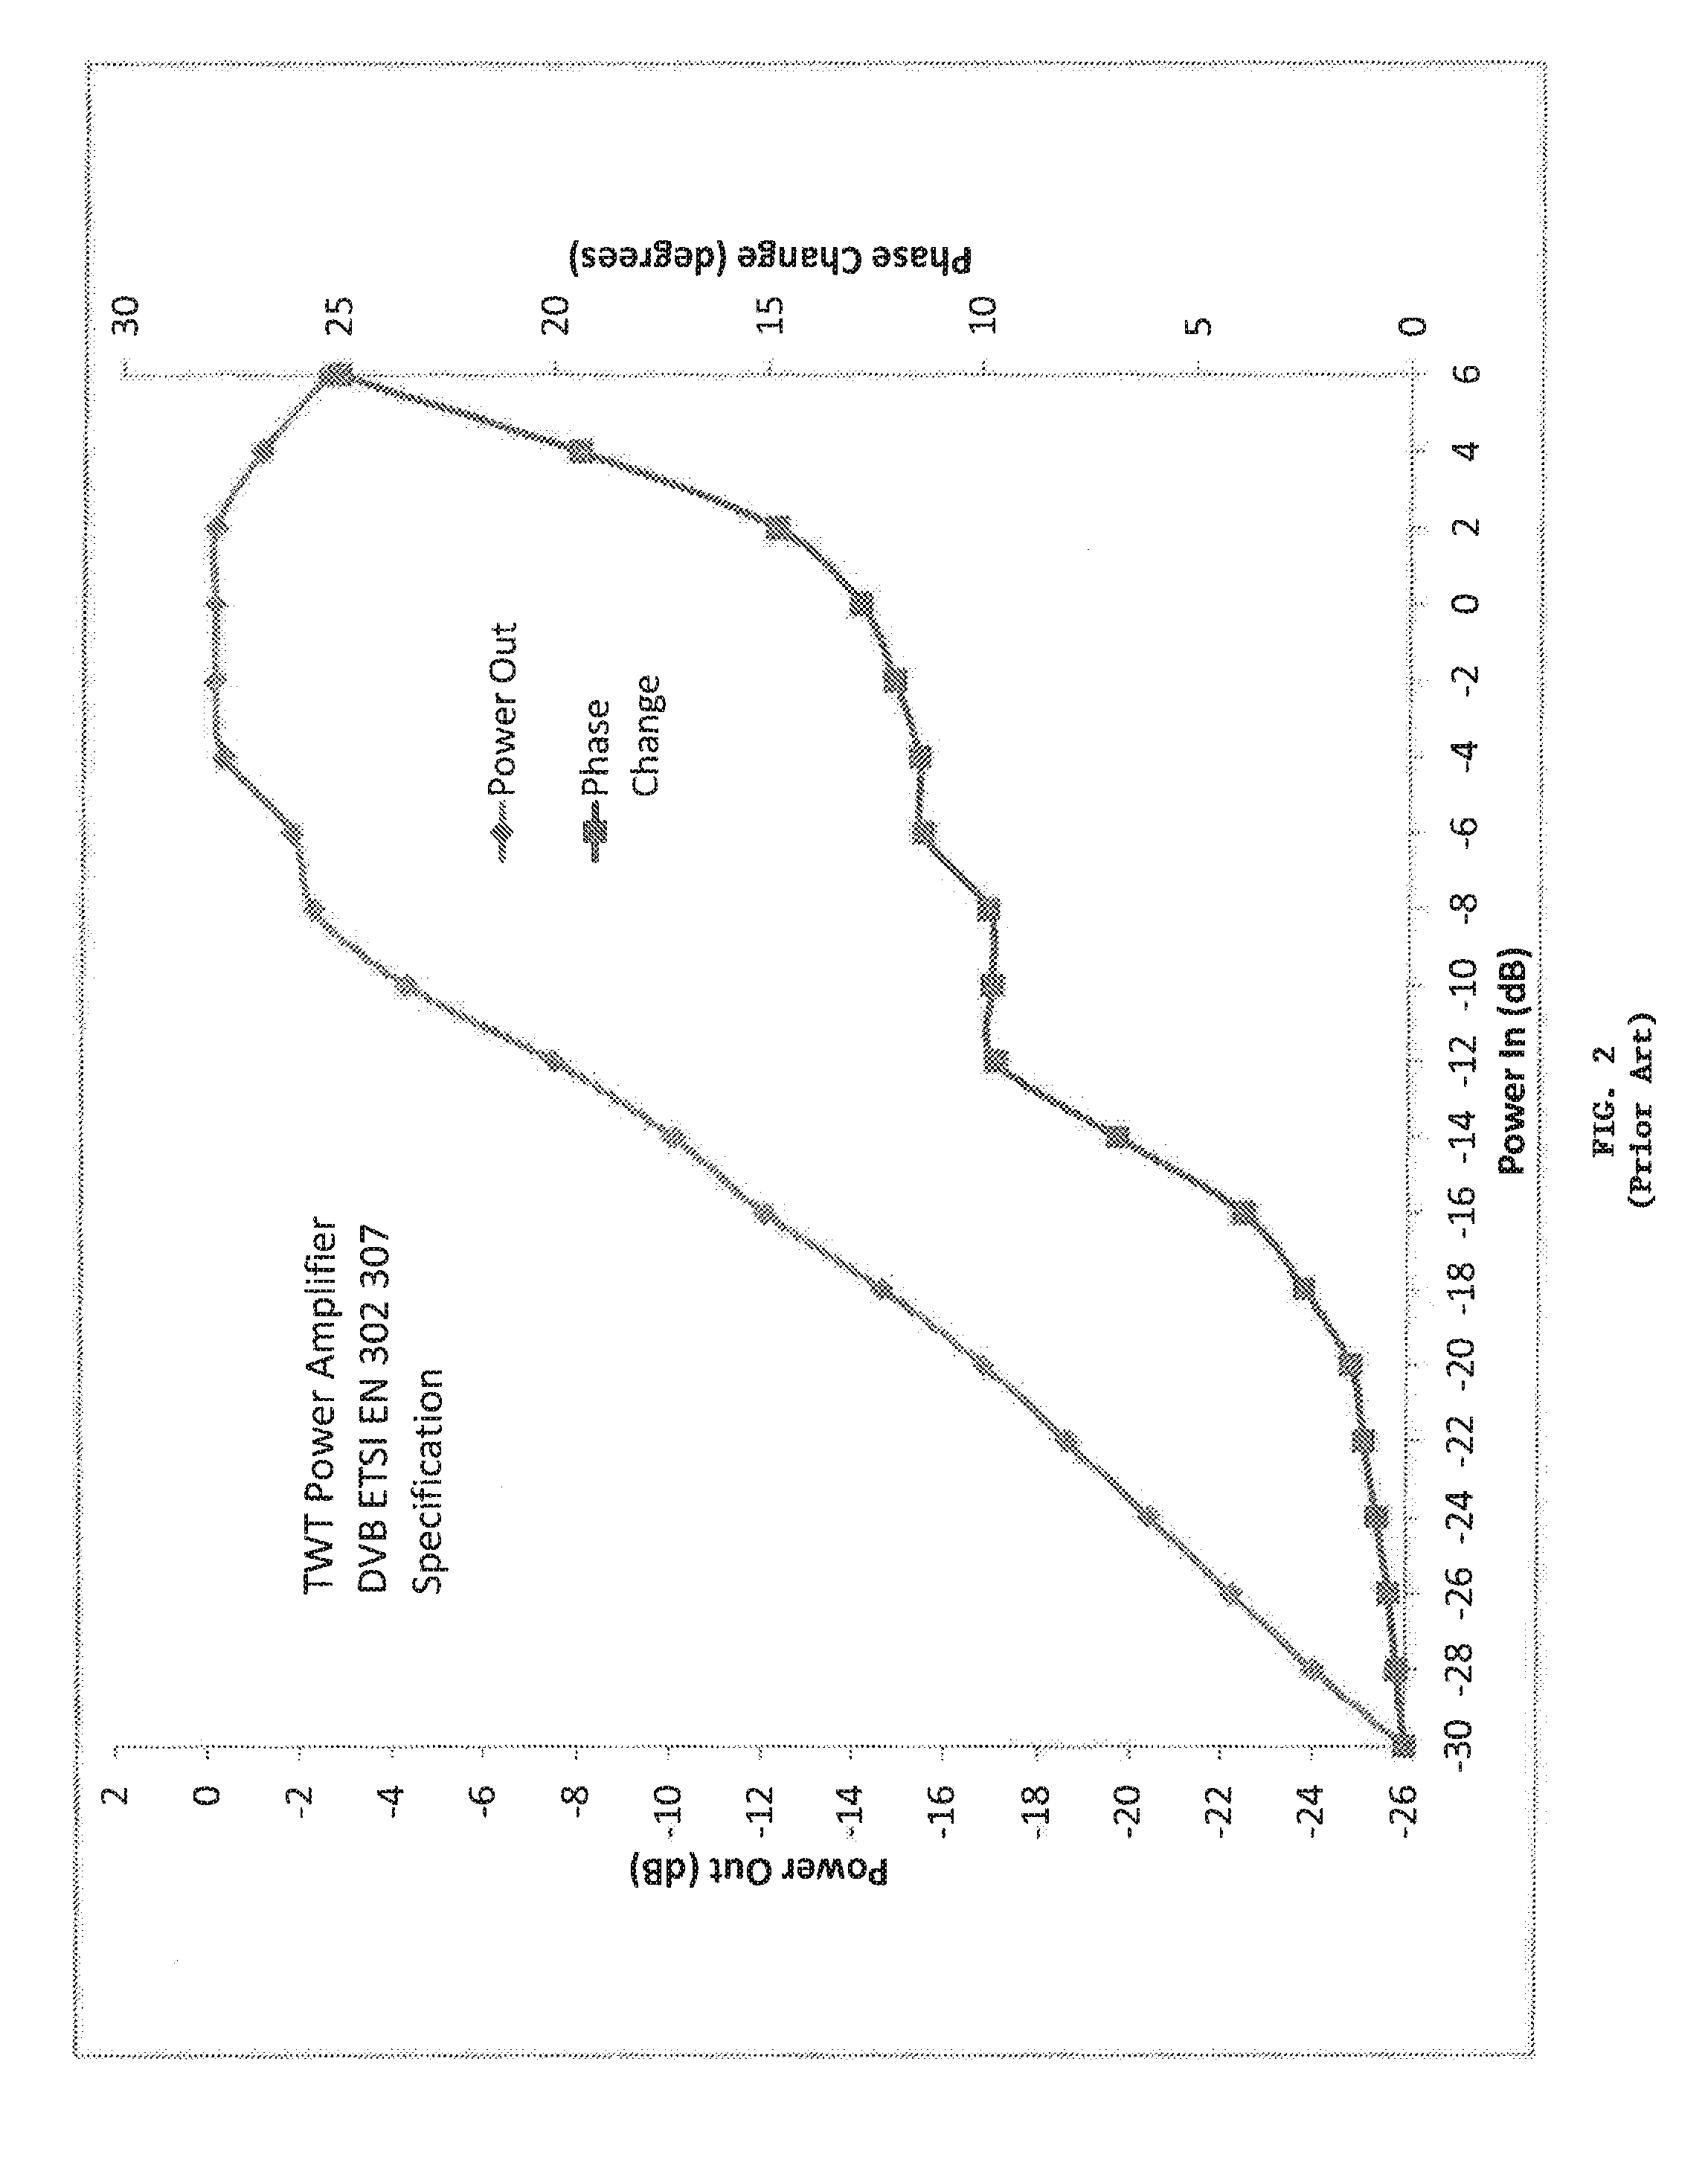 Method and apparatus for demodulation of a desired signal in the presence of nonlinear-distorted interference